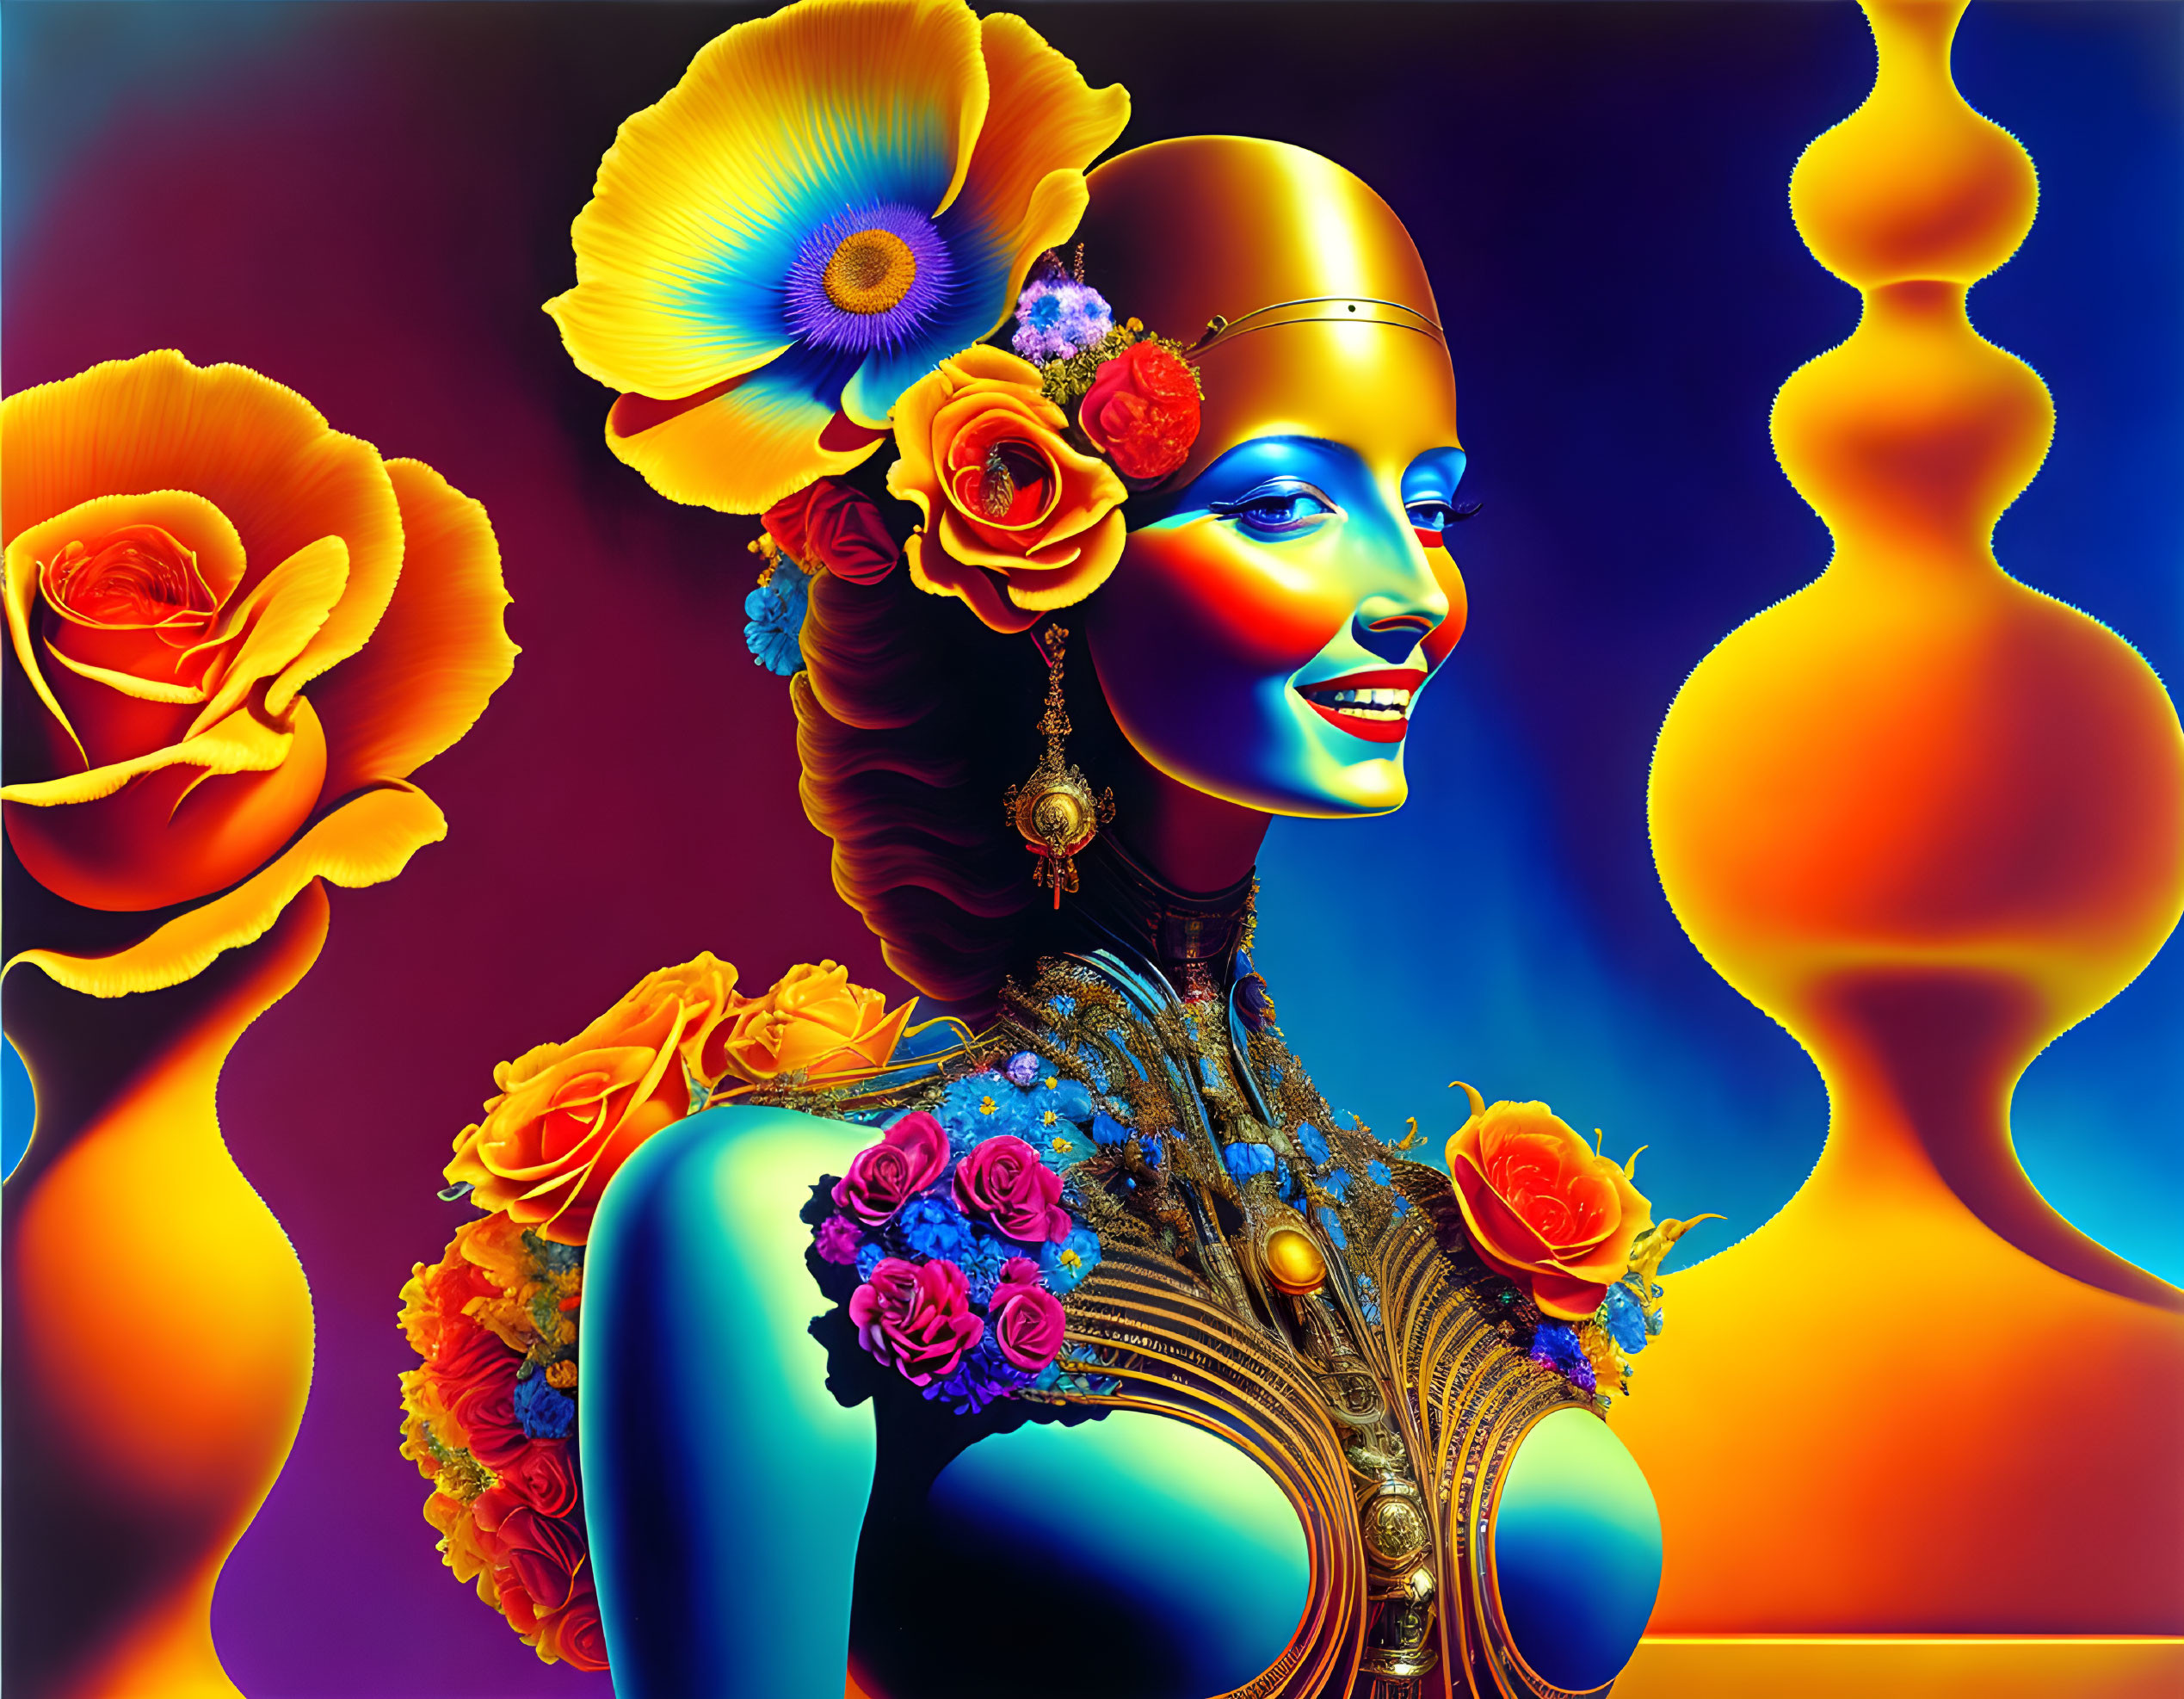 Colorful digital artwork: Woman with floral adornments and golden helmet on abstract background